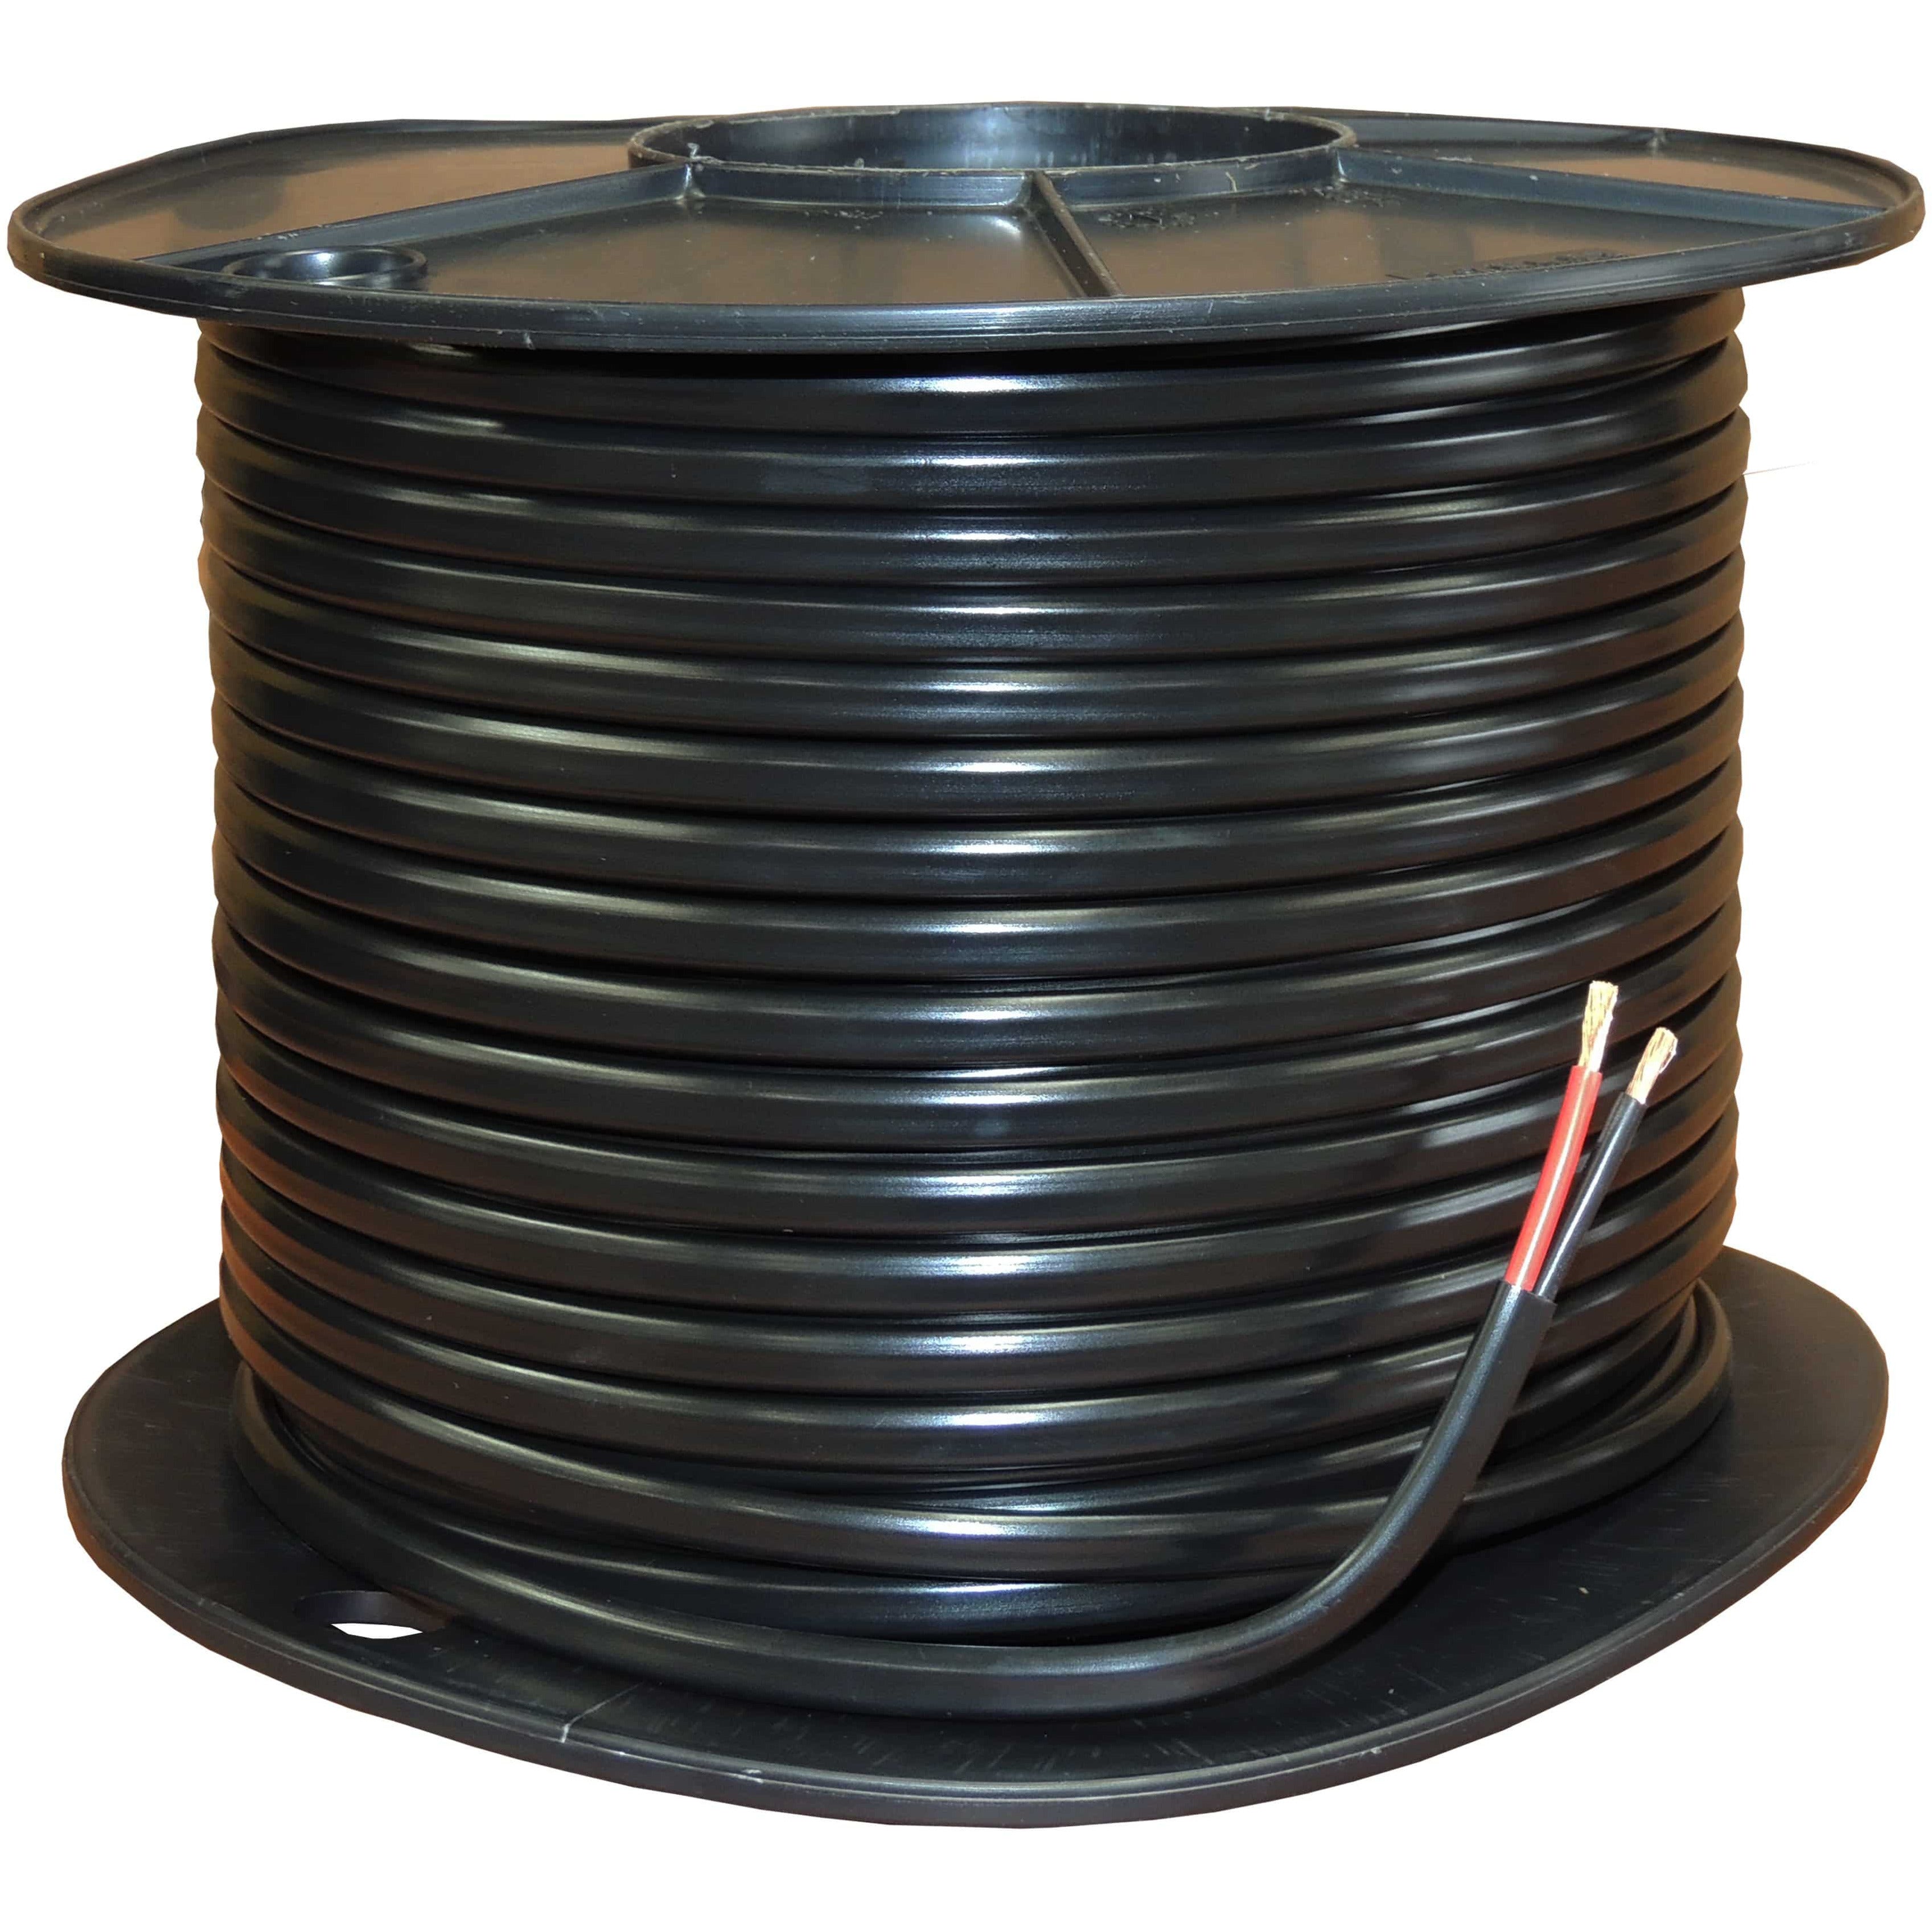 6mm Twin core automotive cable - Rated to 40- 50 Amps